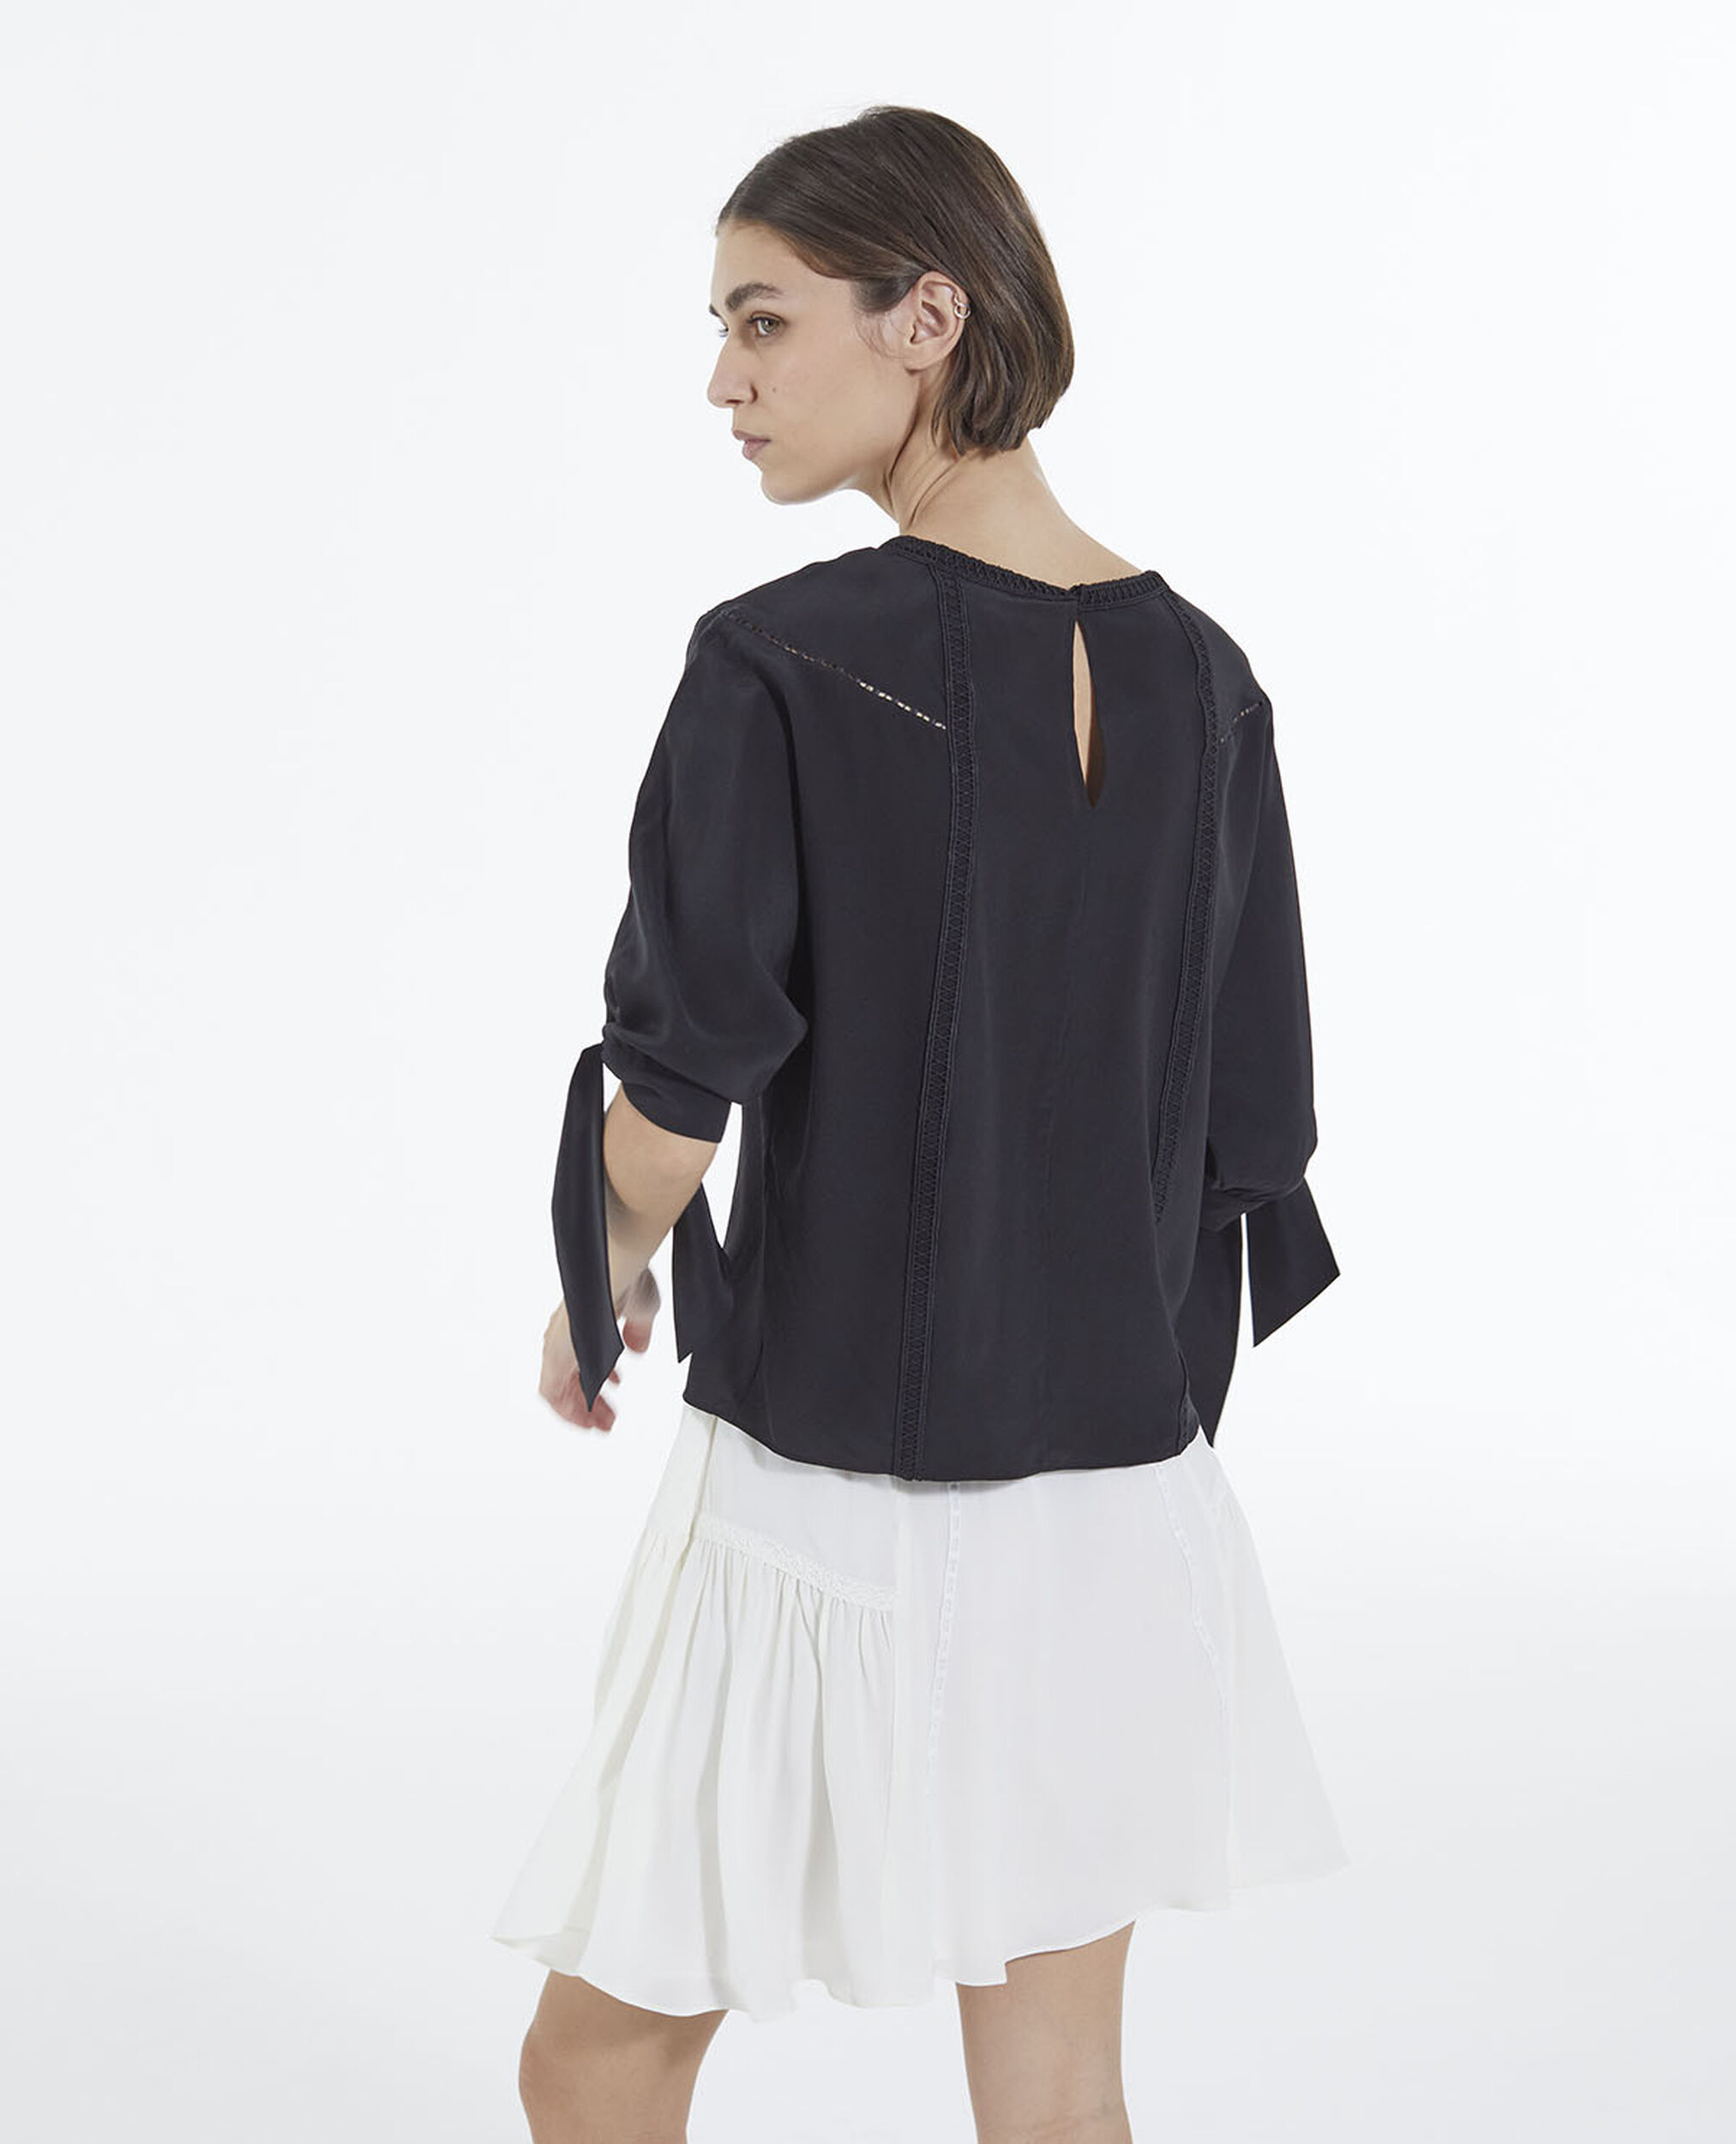 Black silk top with three-quarter length sleeves, BLACK, hi-res image number null